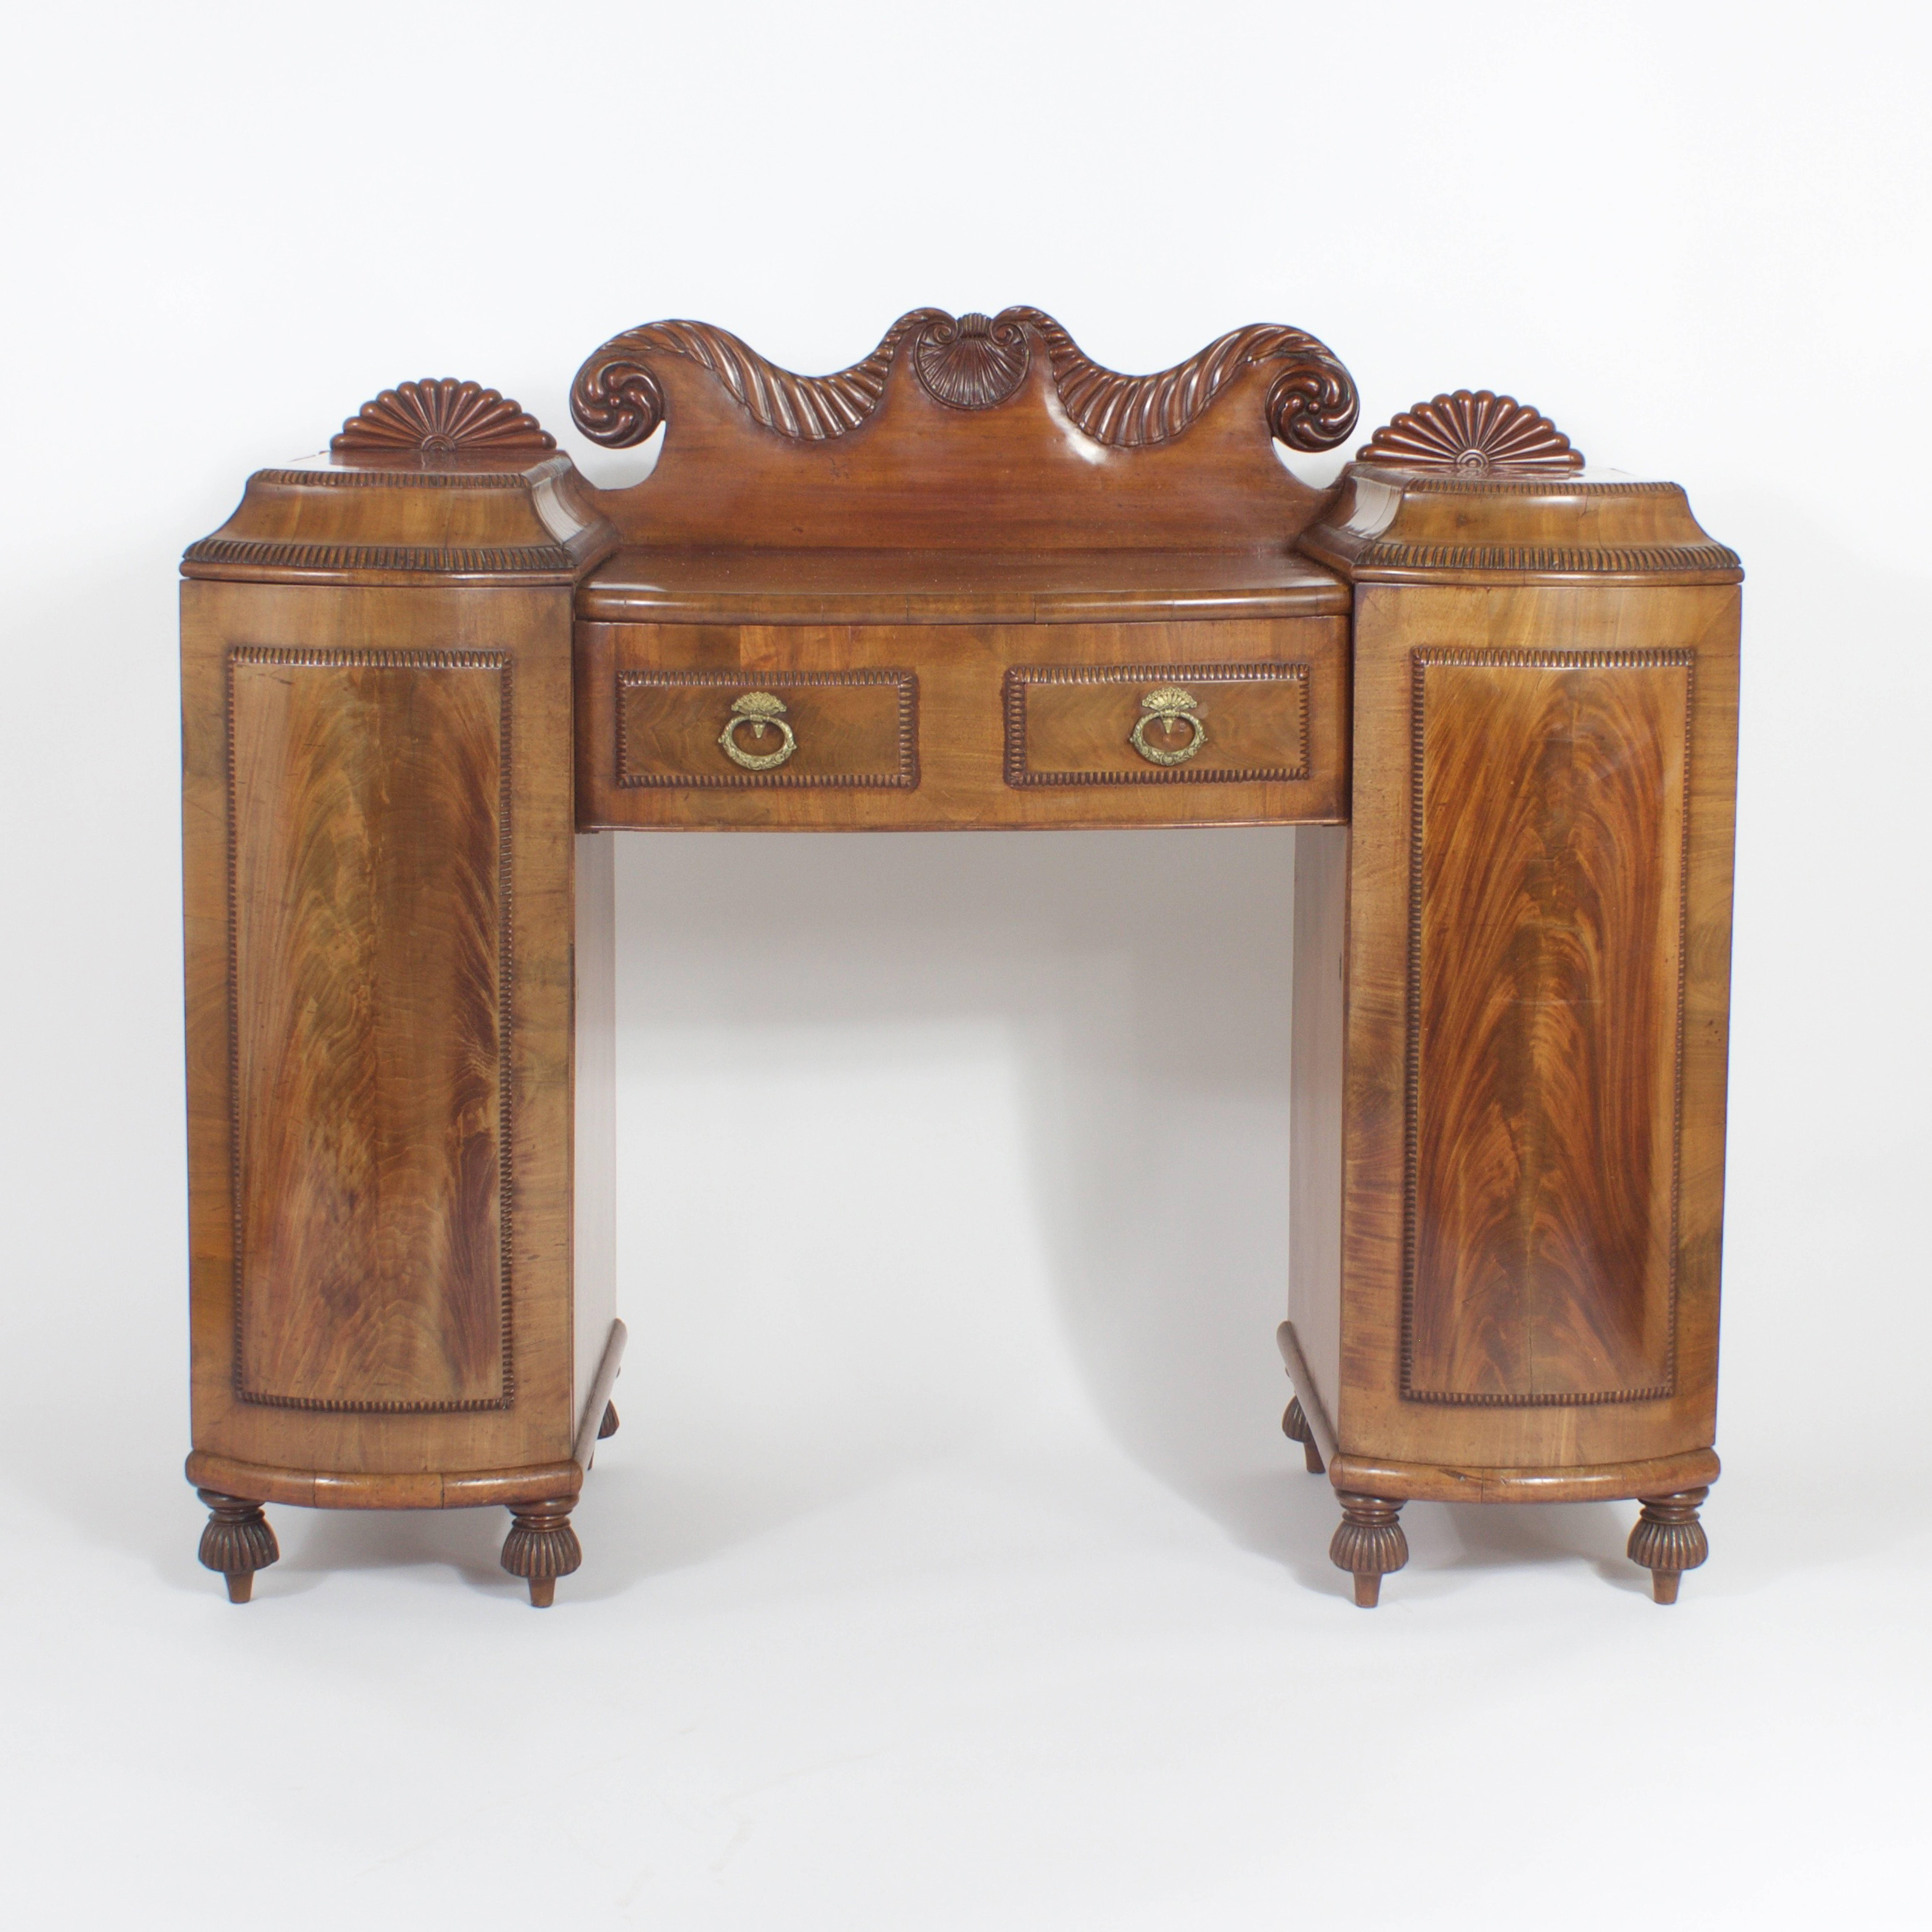 A rare small antique English mahogany server or sideboard, William IV in style, with an uncommon form, beautiful faded mahogany and a sculpted, carved gallery depicting shells, waves and nautilus. Having two drawers in a center compartment with